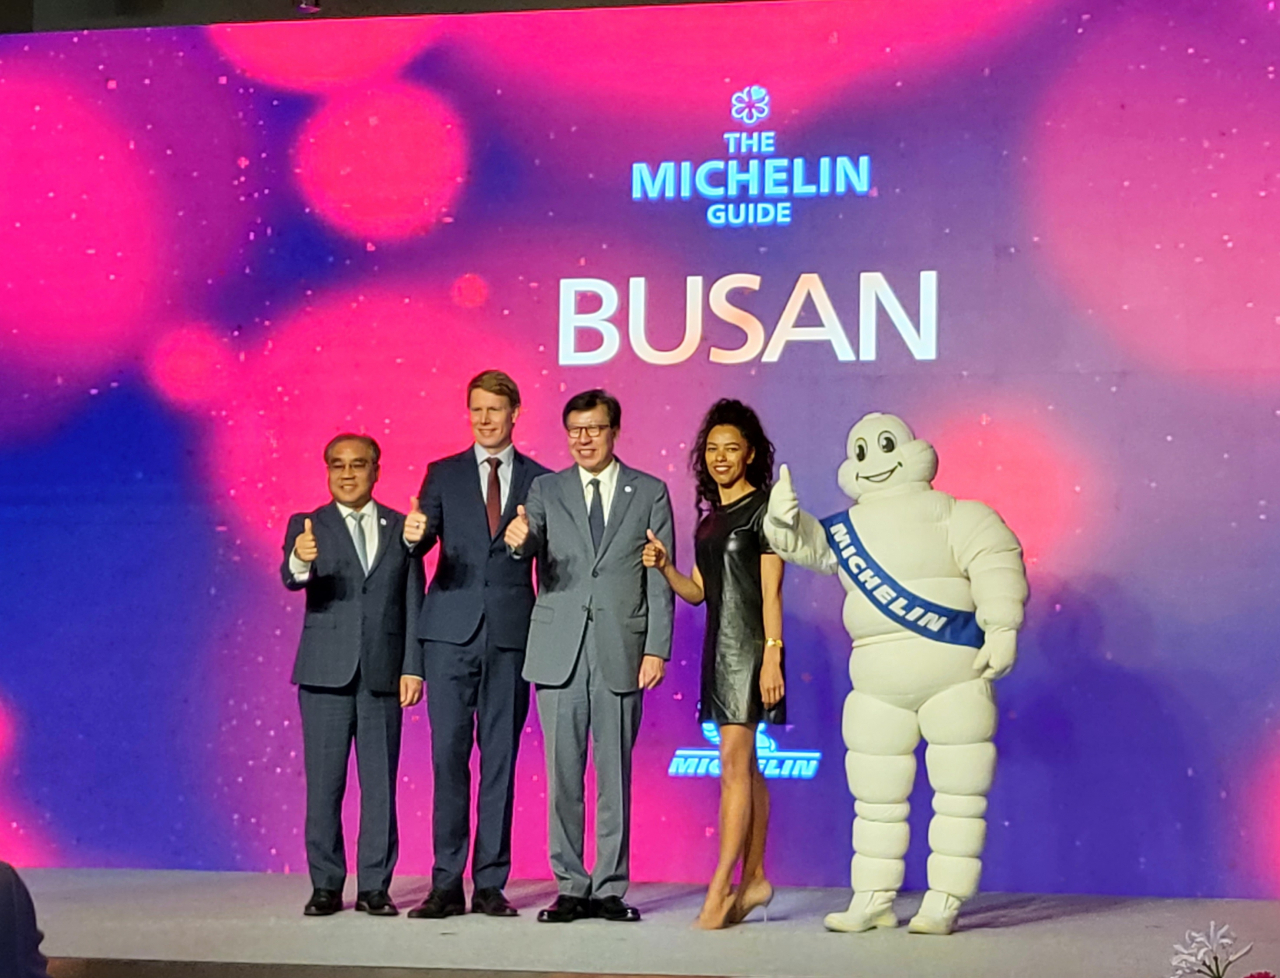 (From left) Busan Tourism Organization President Lee Jung-sil, Director of Michelin Guide Asia and Middle East Chris Gledhill, Busan Mayor Park Heong-joon and Michelin Guide Experiences Director Elisabeth Boucher-Anselin, pose during a press conference held Thursday at Park Hyatt Busan. (Kim Hae-yeon/ The Korea Herald)